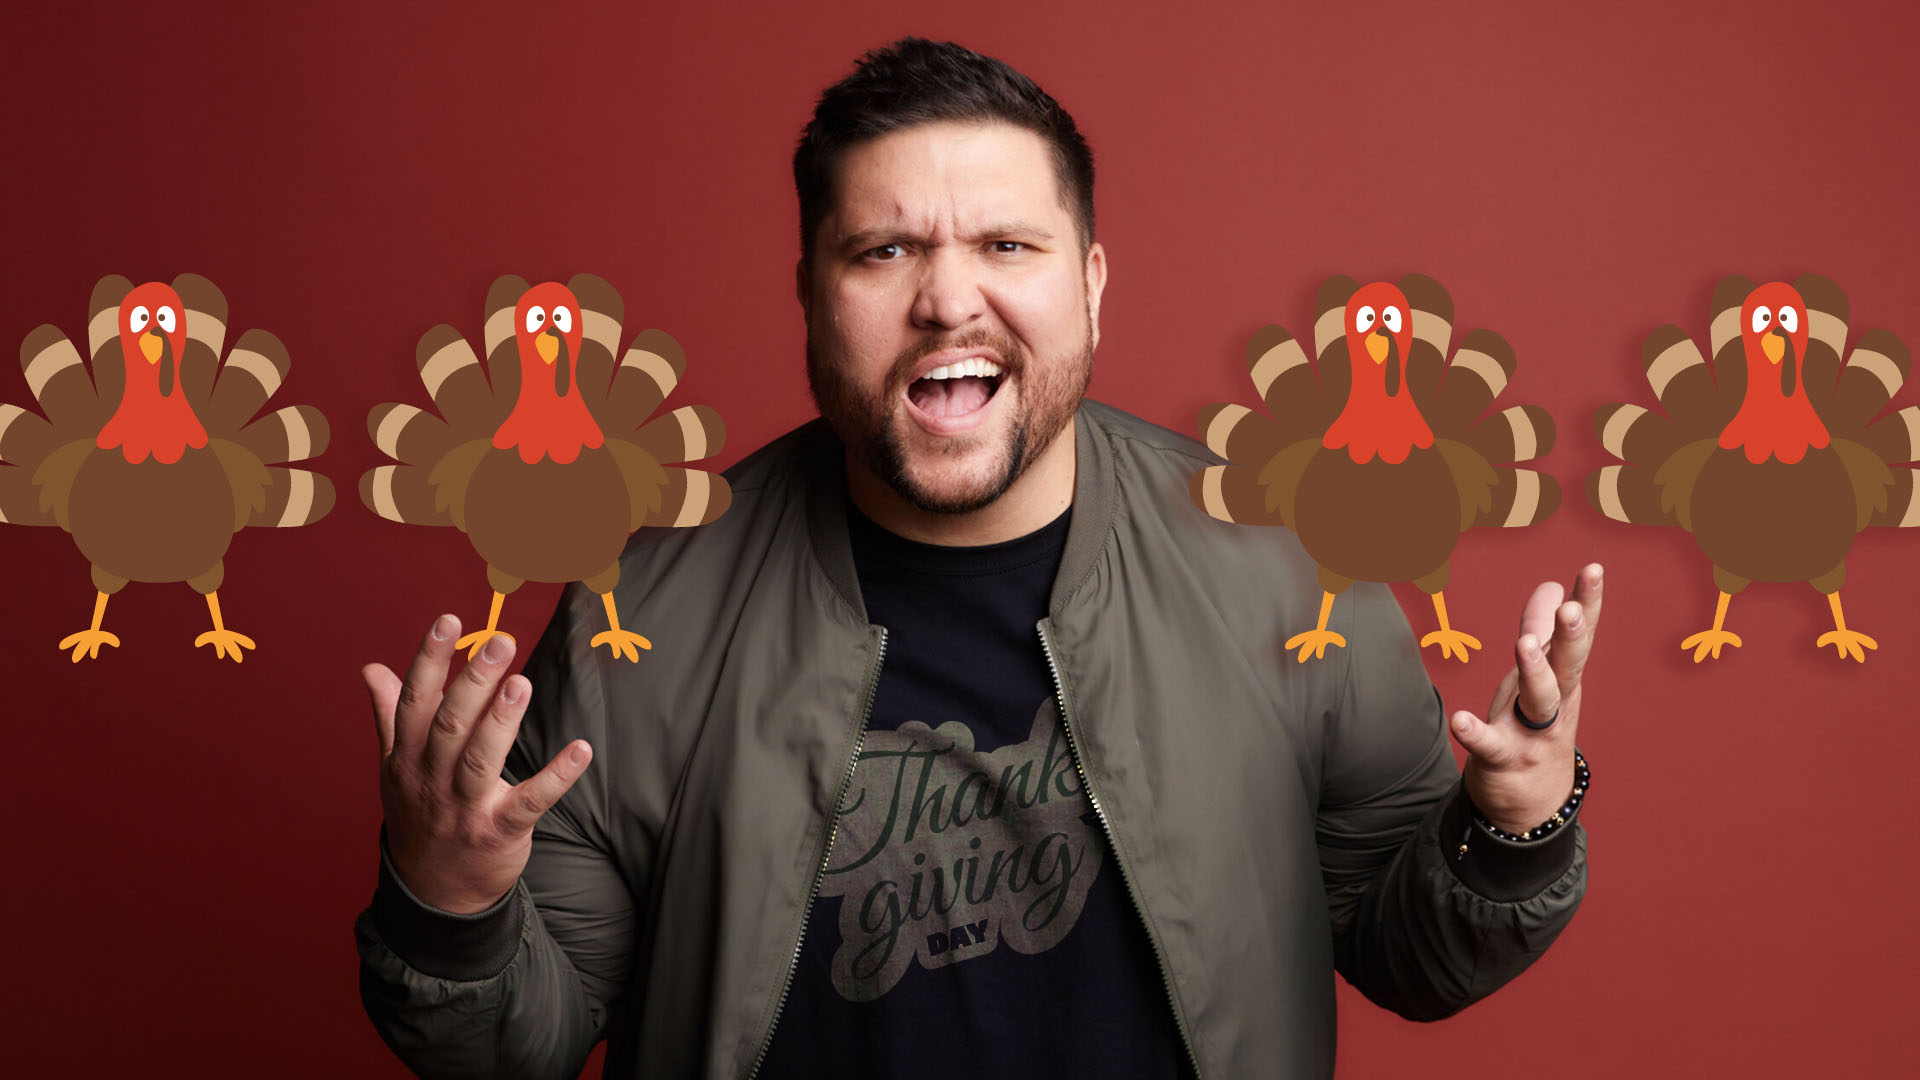 5 Thanksgiving Parody Songs That Will Make You Laugh Out Loud - Micah Tyler